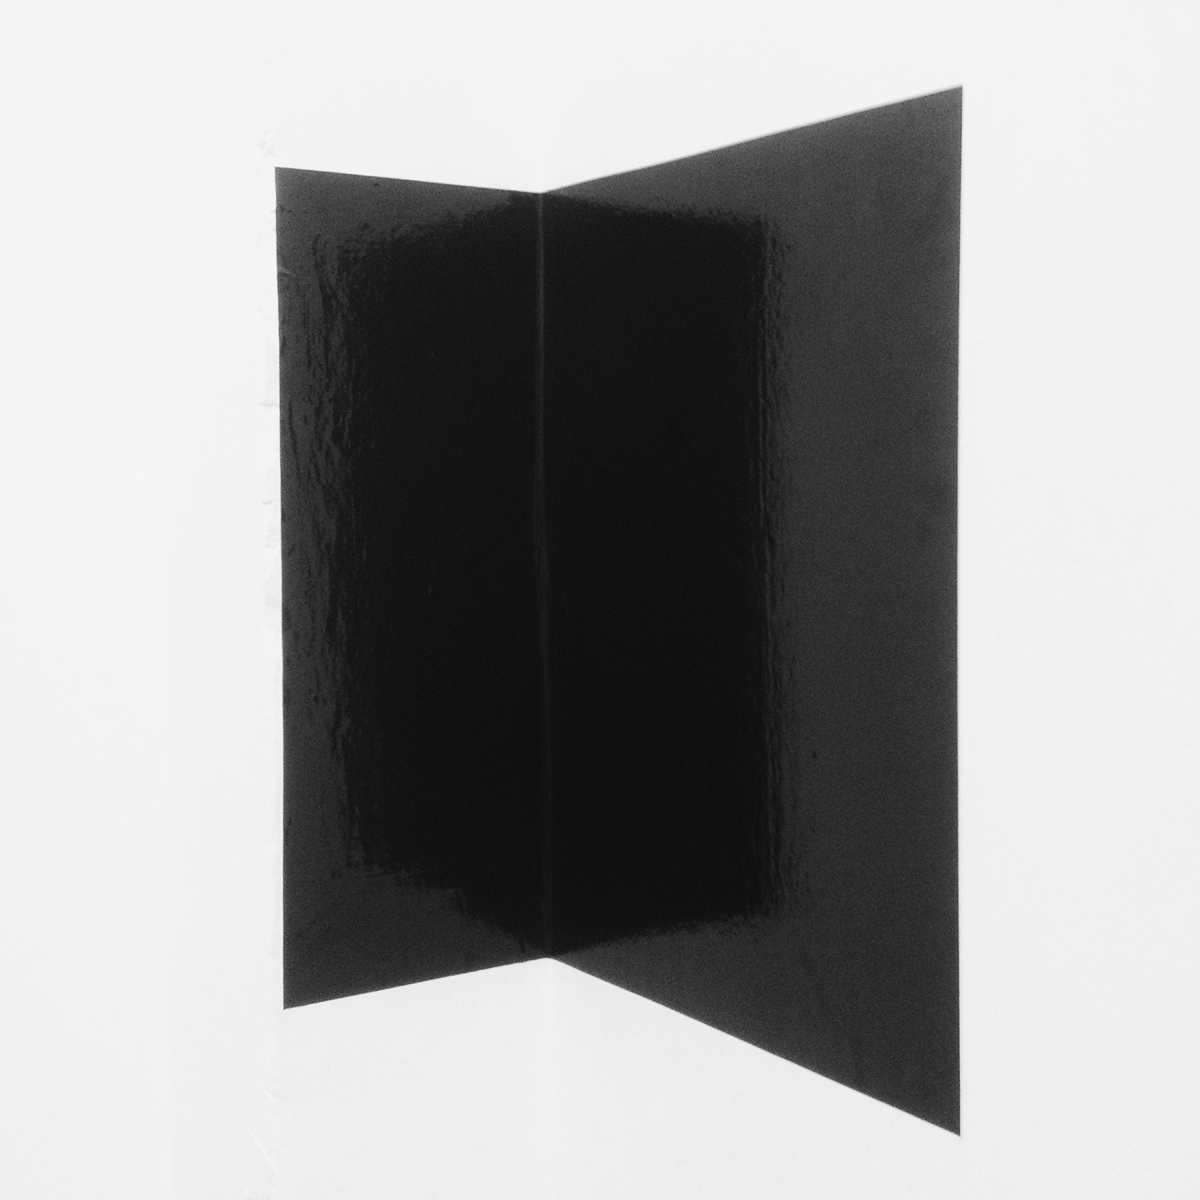  Untitled (introspection)  2014, Temporary site specific installation, black glossy vinyl adhered to a corner, approx 36 inches high  